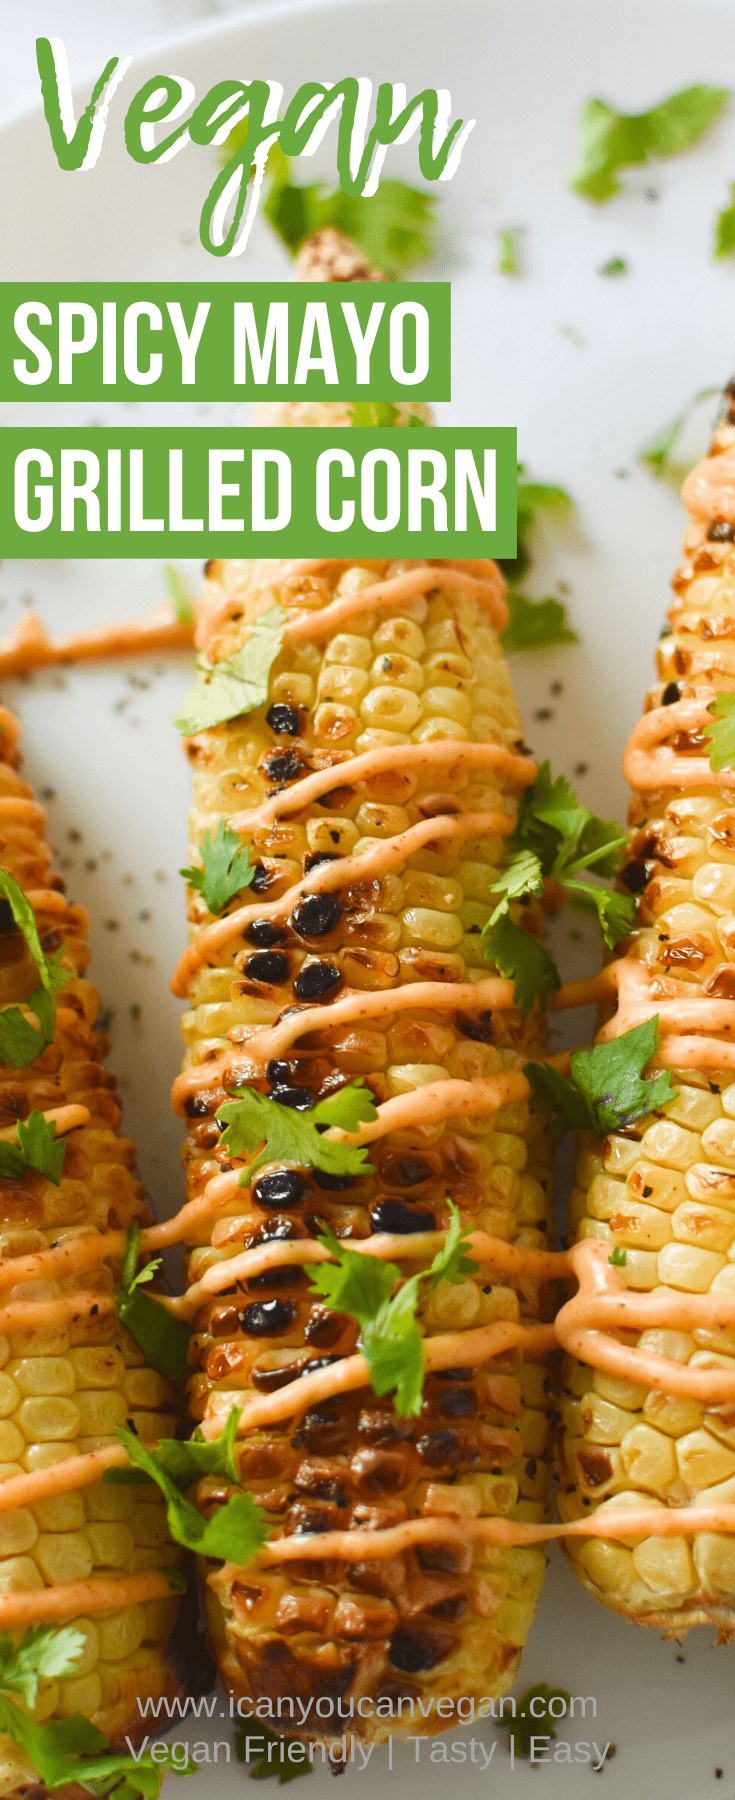 Spicy Mayo Grilled Corn Pinterest